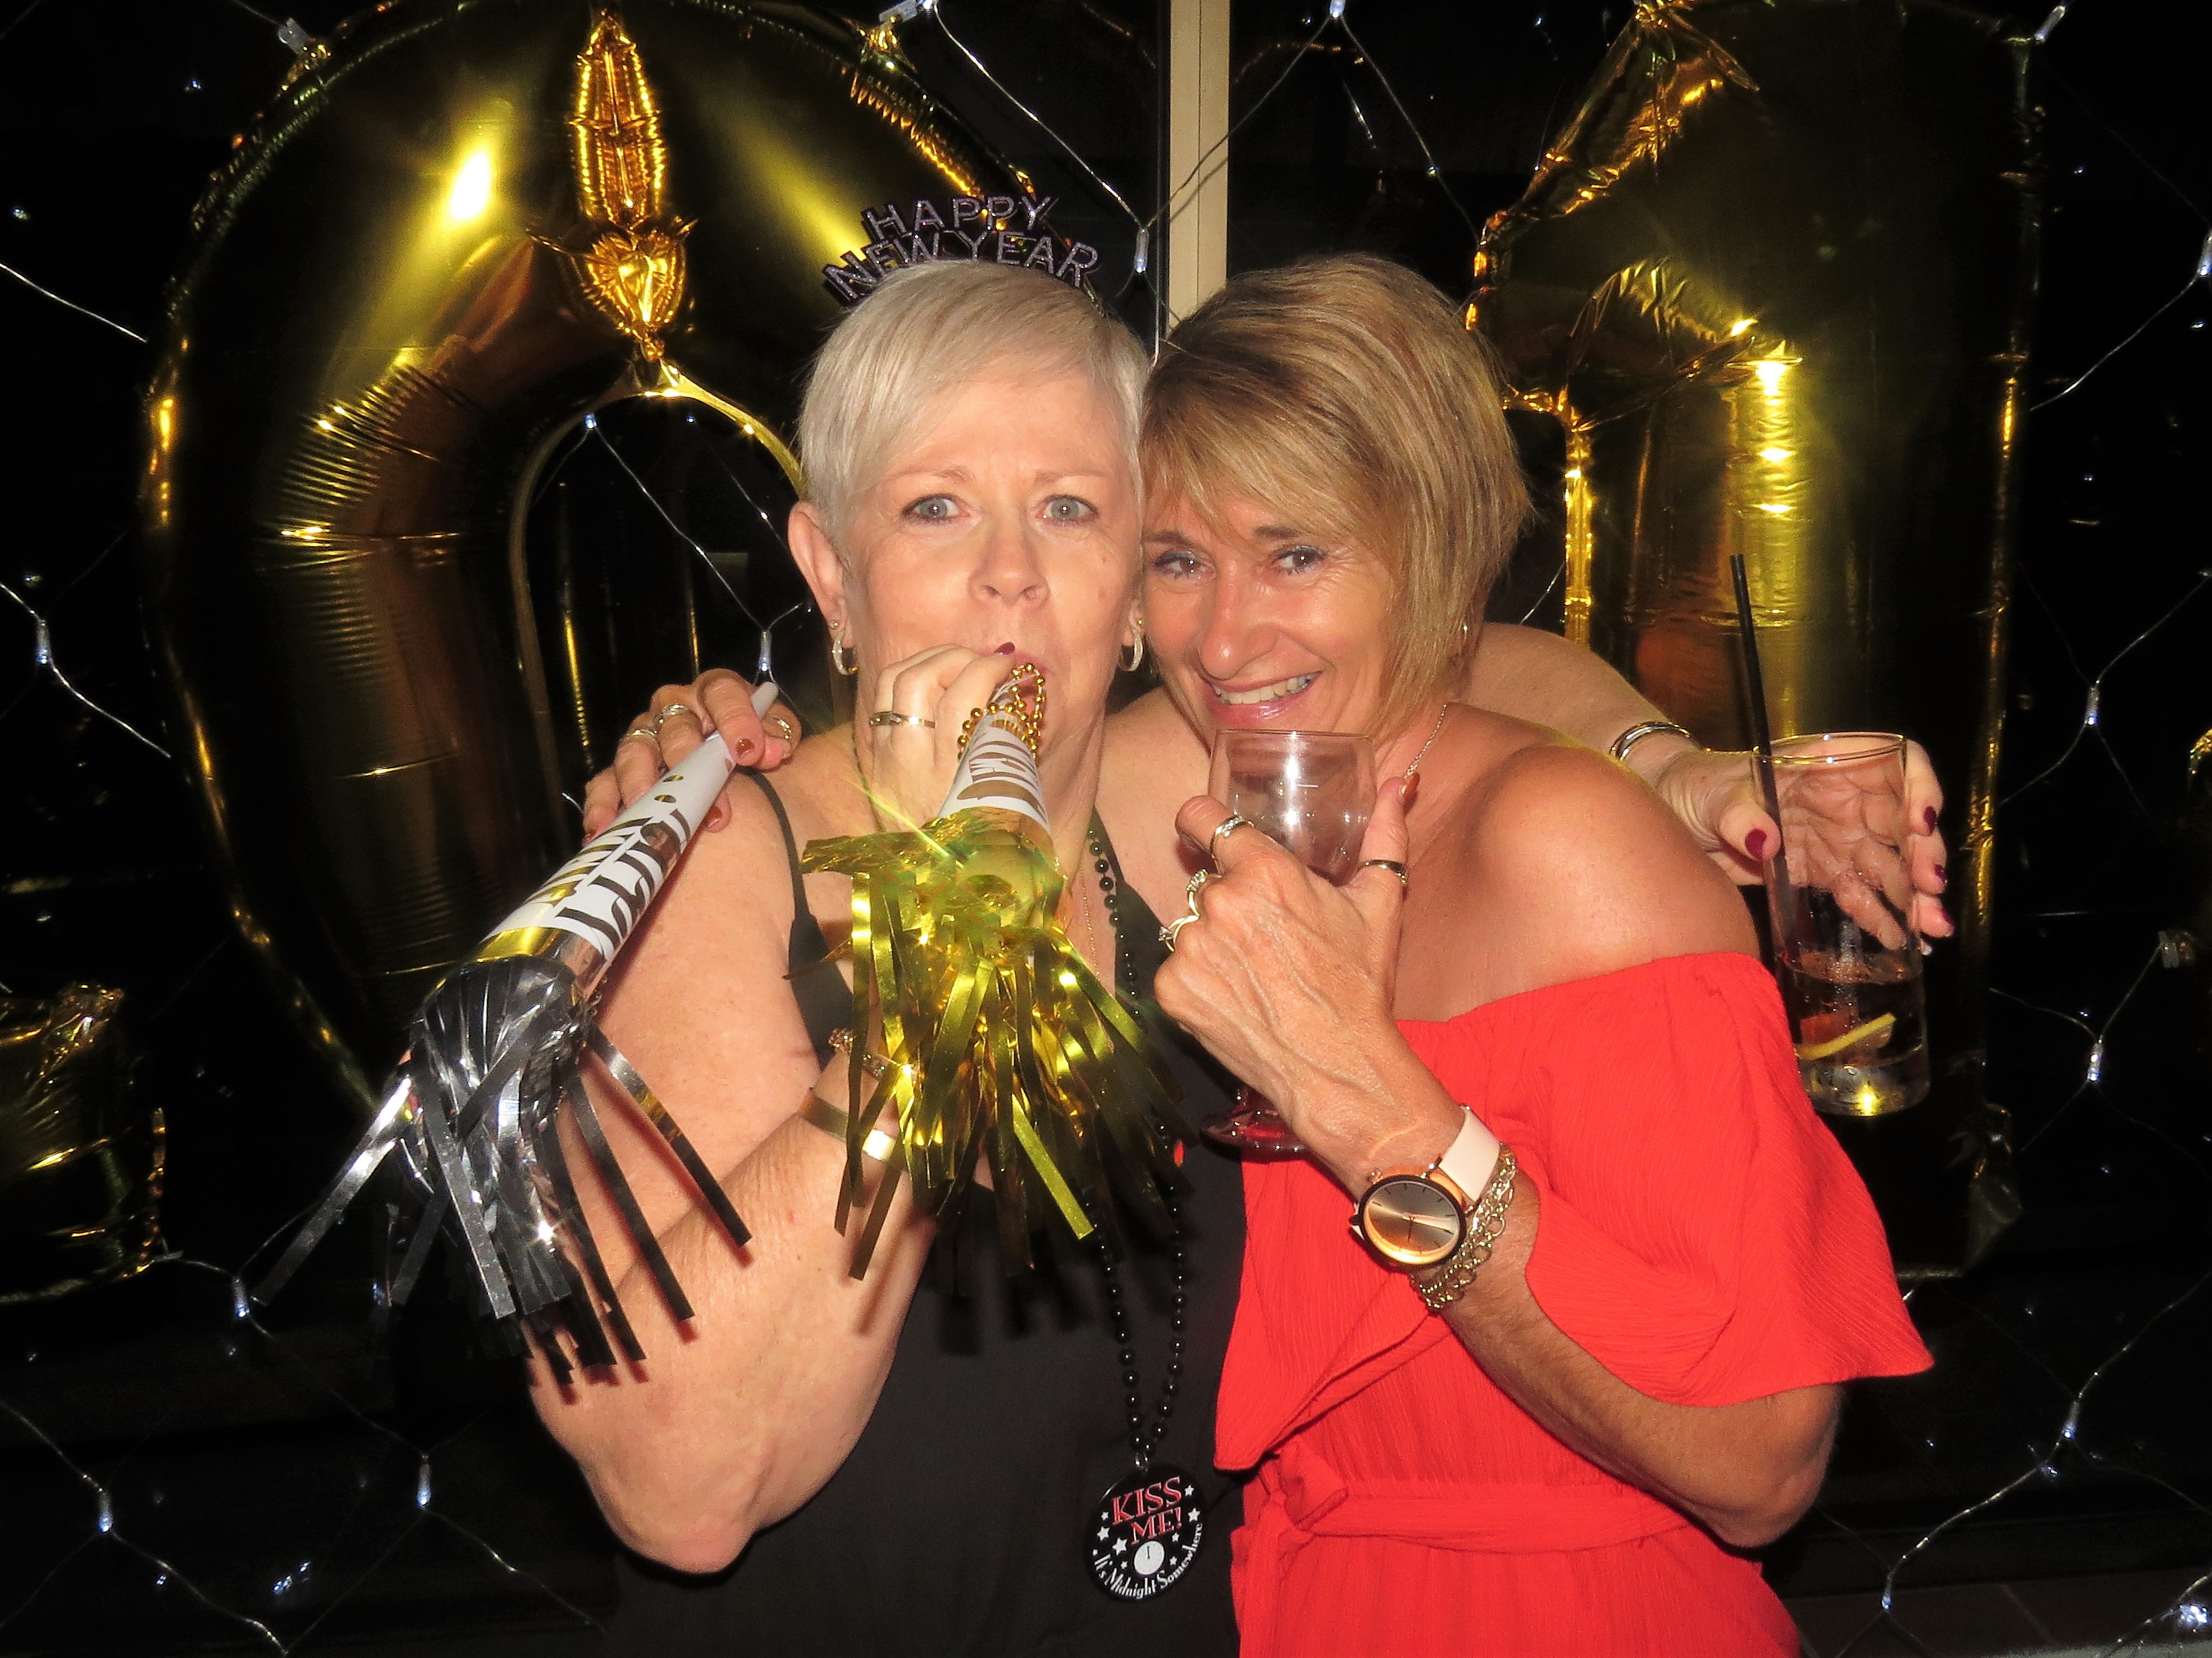 Happy New Year: Karen Barry and Lexie Gregory.